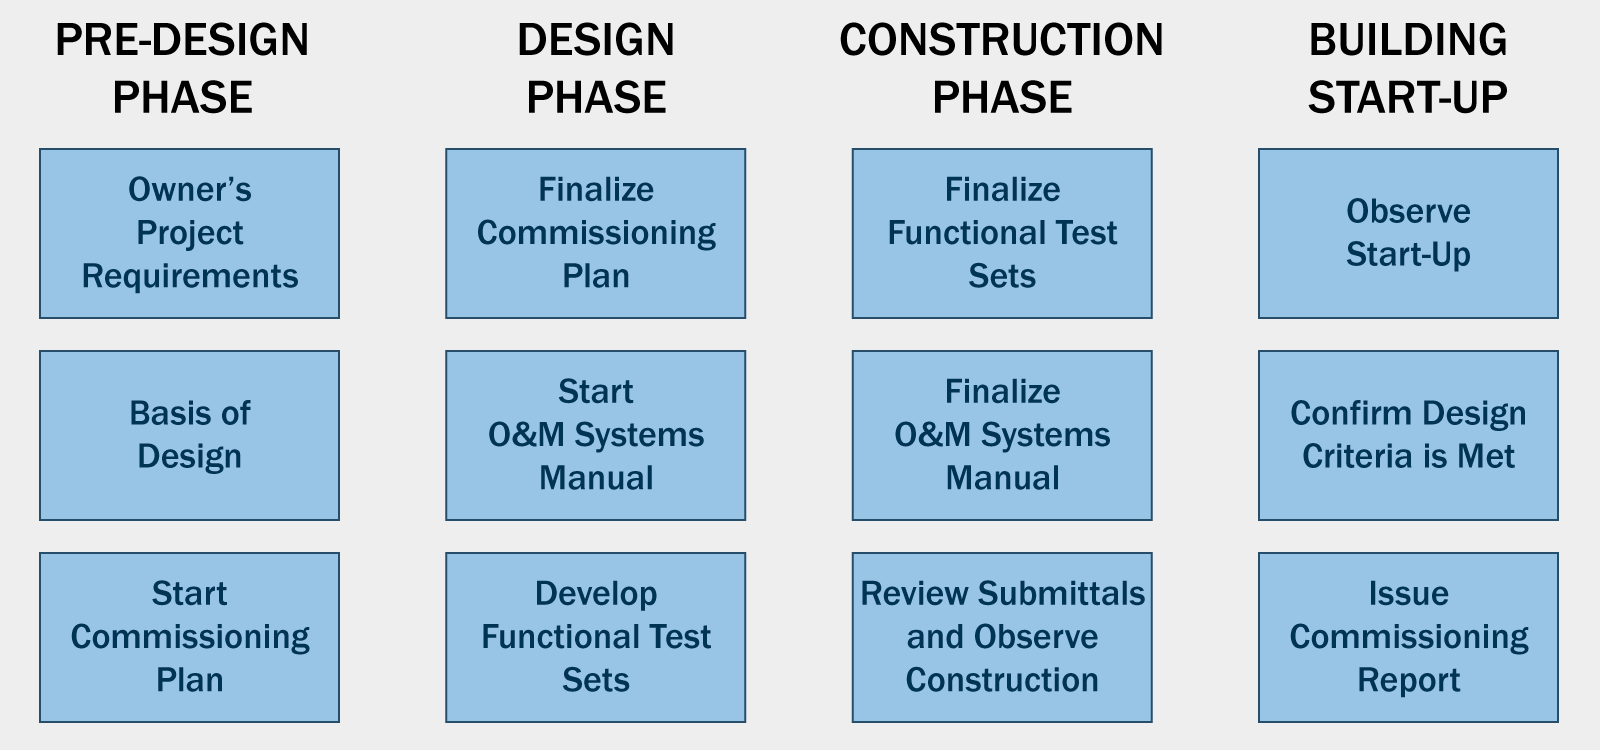 Diagram of Building Commissioning Activity by Phase